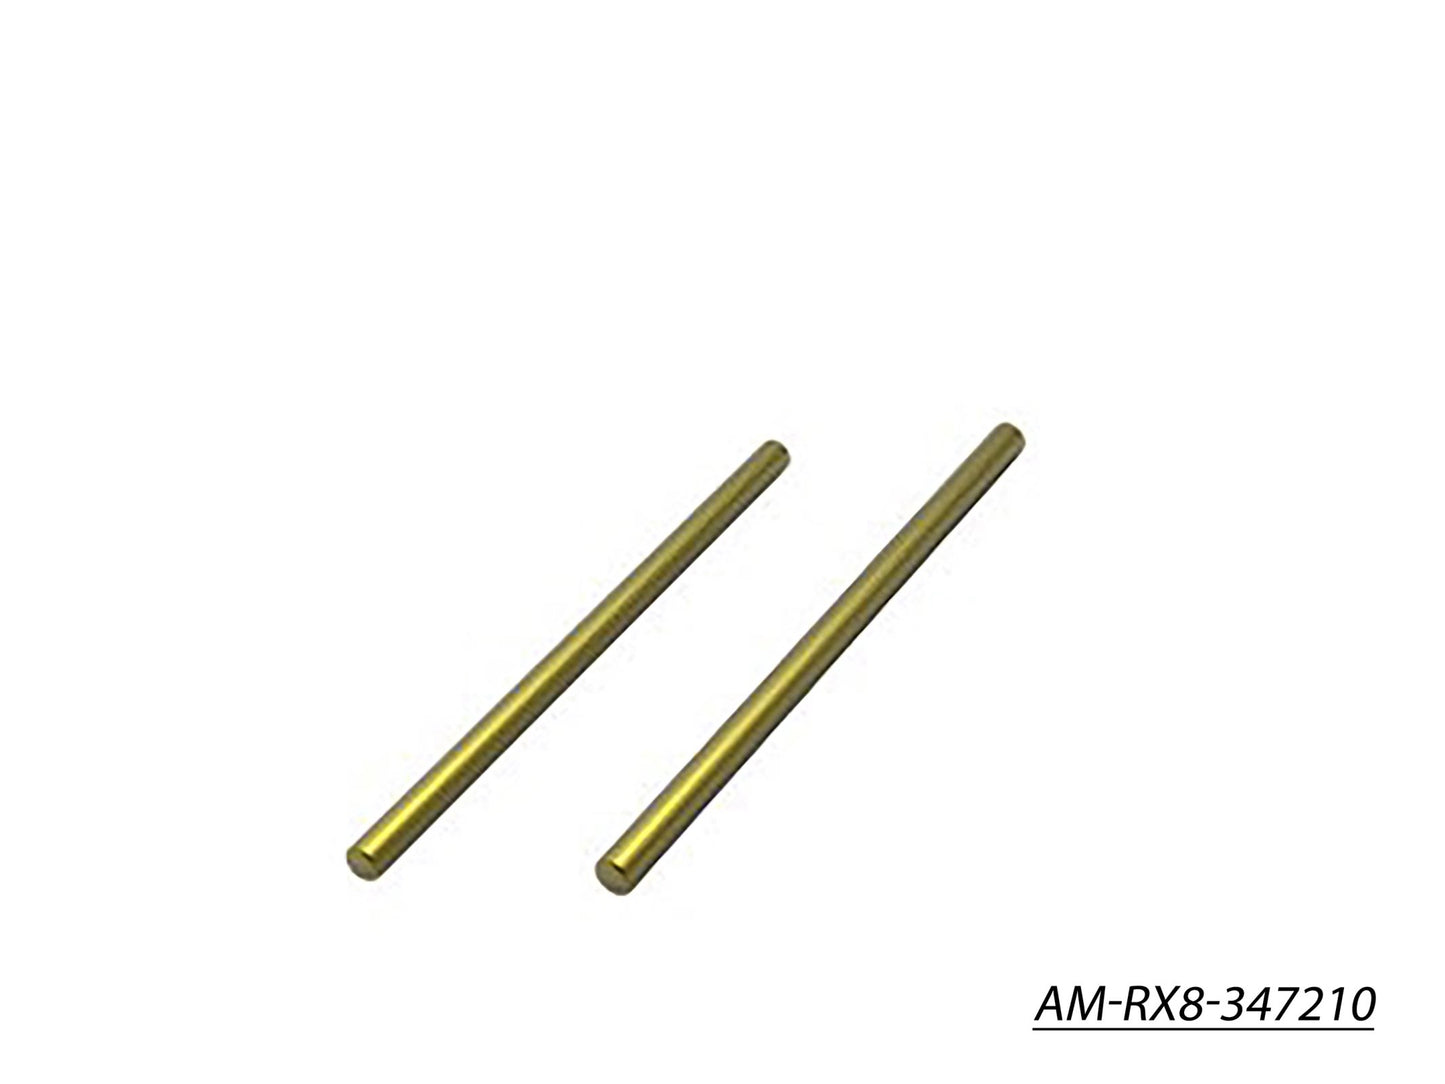 Front Lower Inner Pivot Pin - Tini (Spring Steel) (2) (AM-RX8-347210)